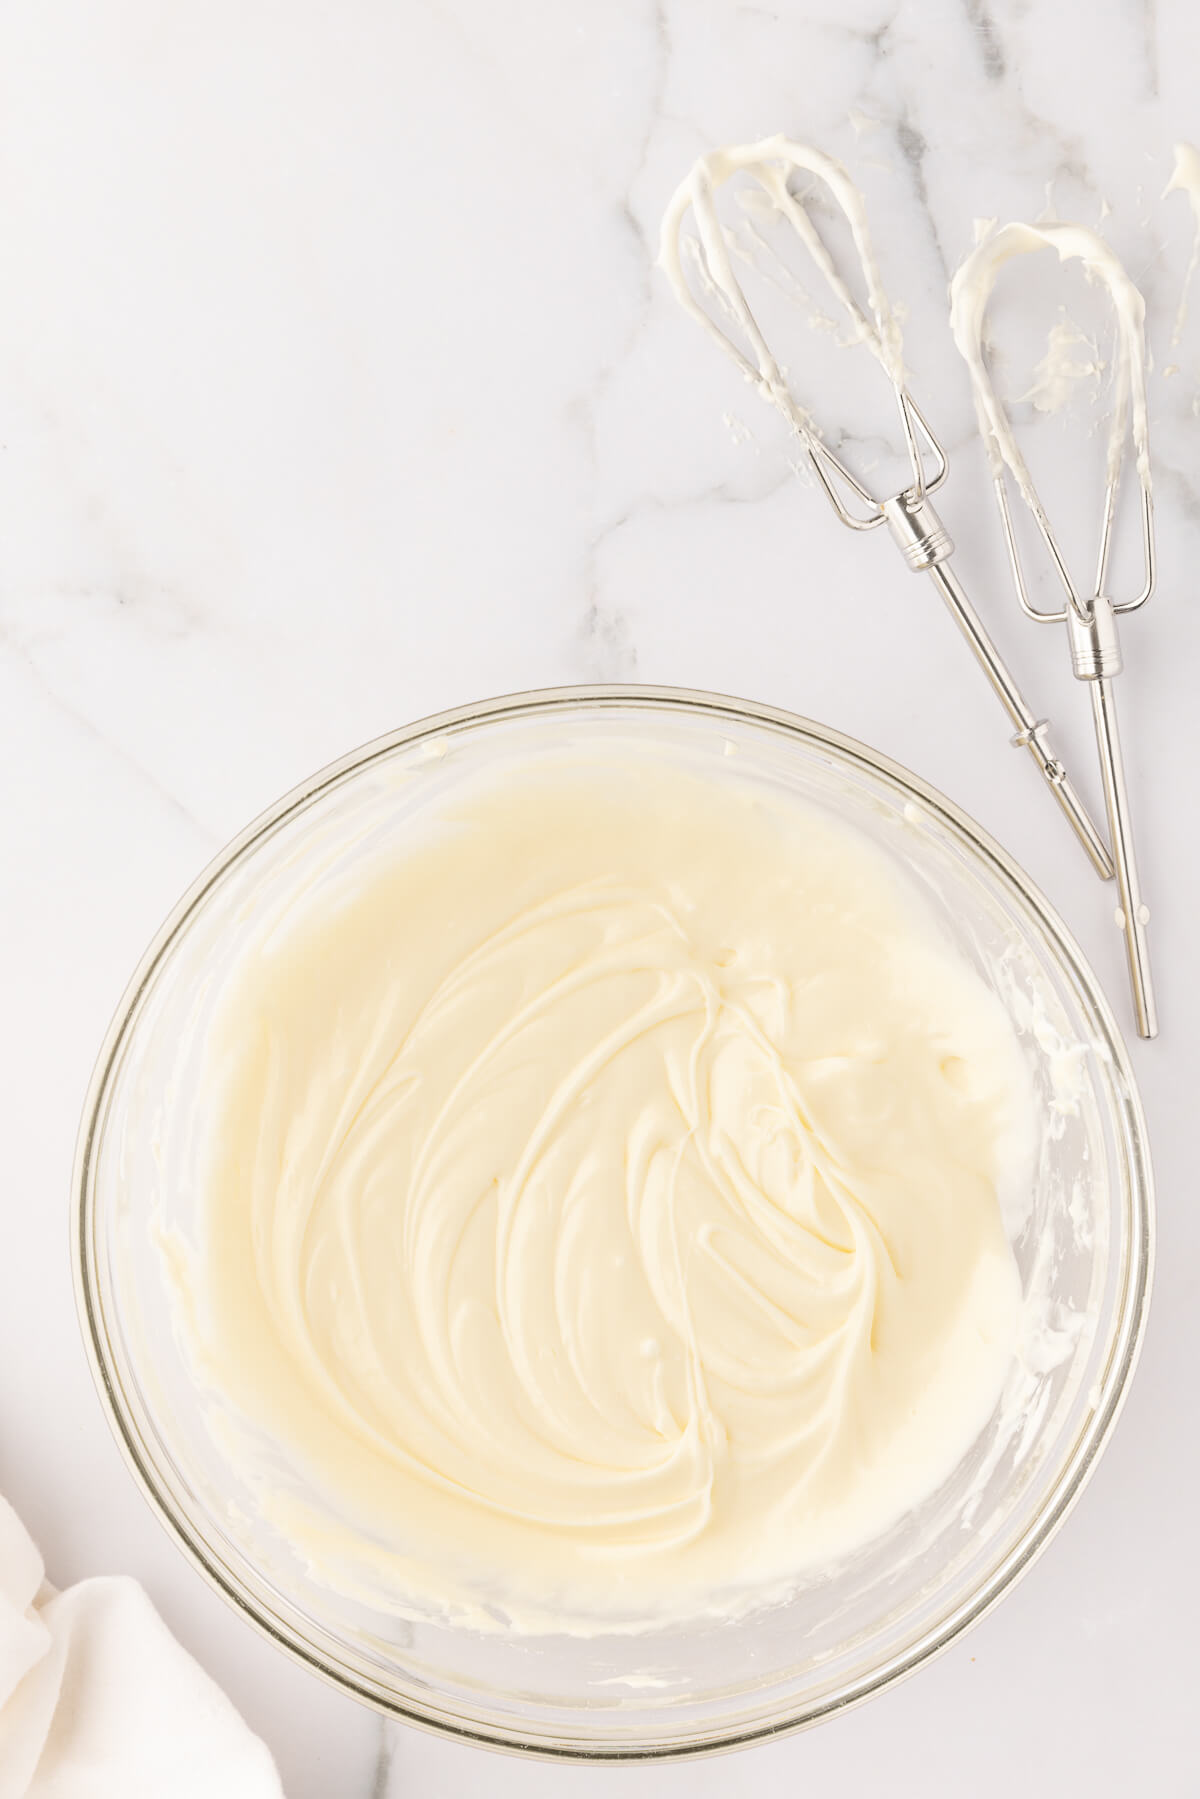 Homemade cream cheese frosting in a glass bowl on a marble countertop.